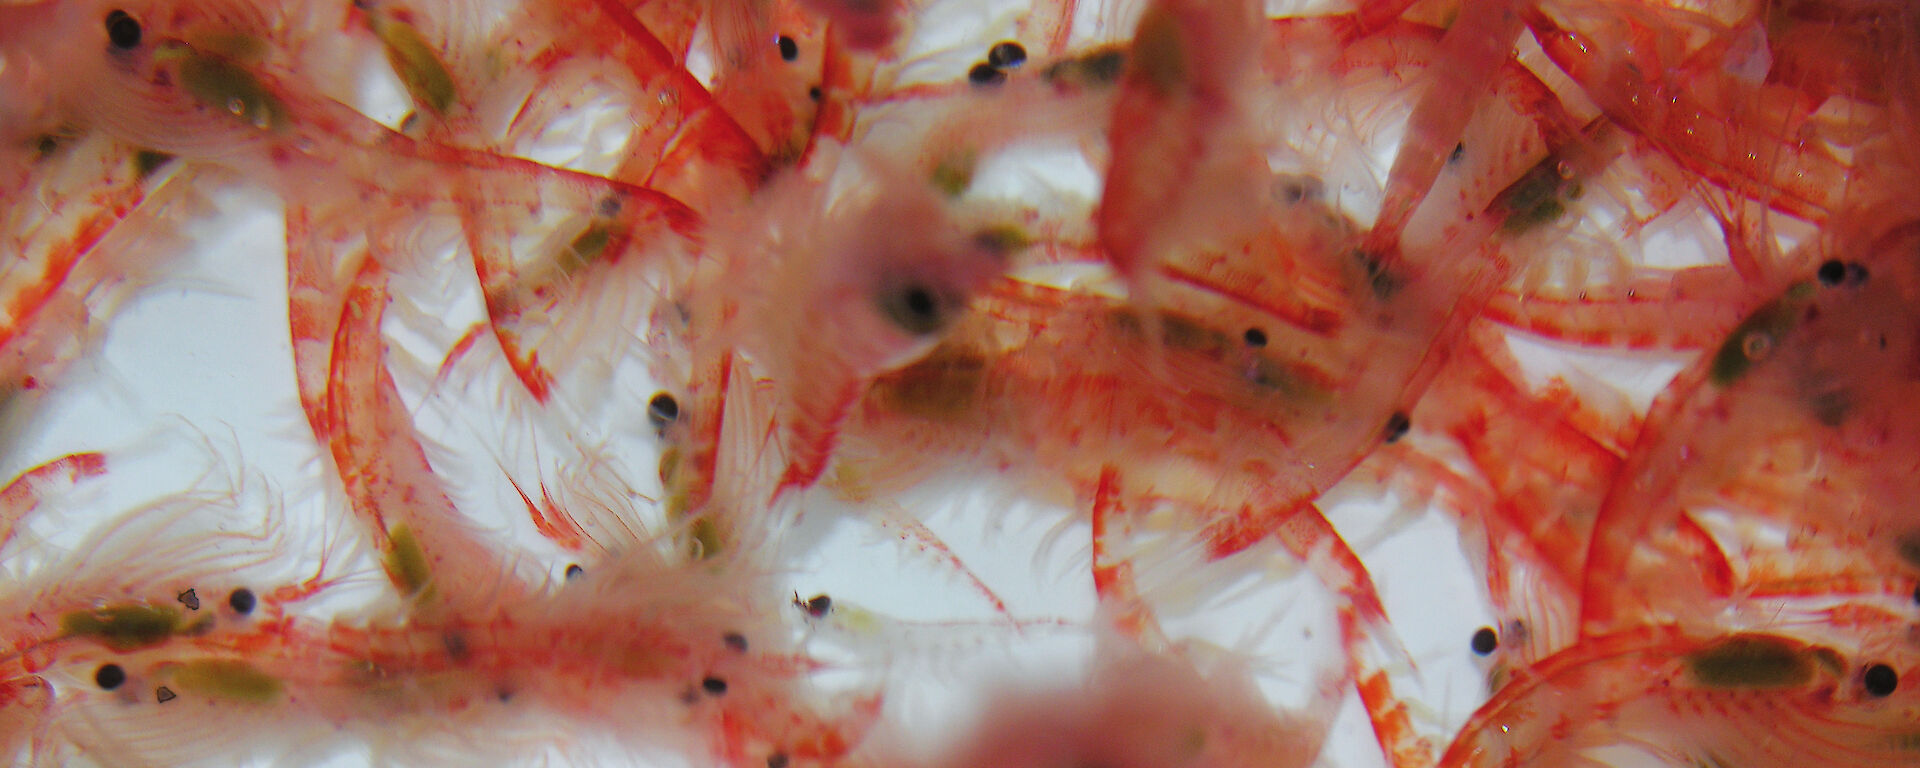 A group of Antarctic krill.